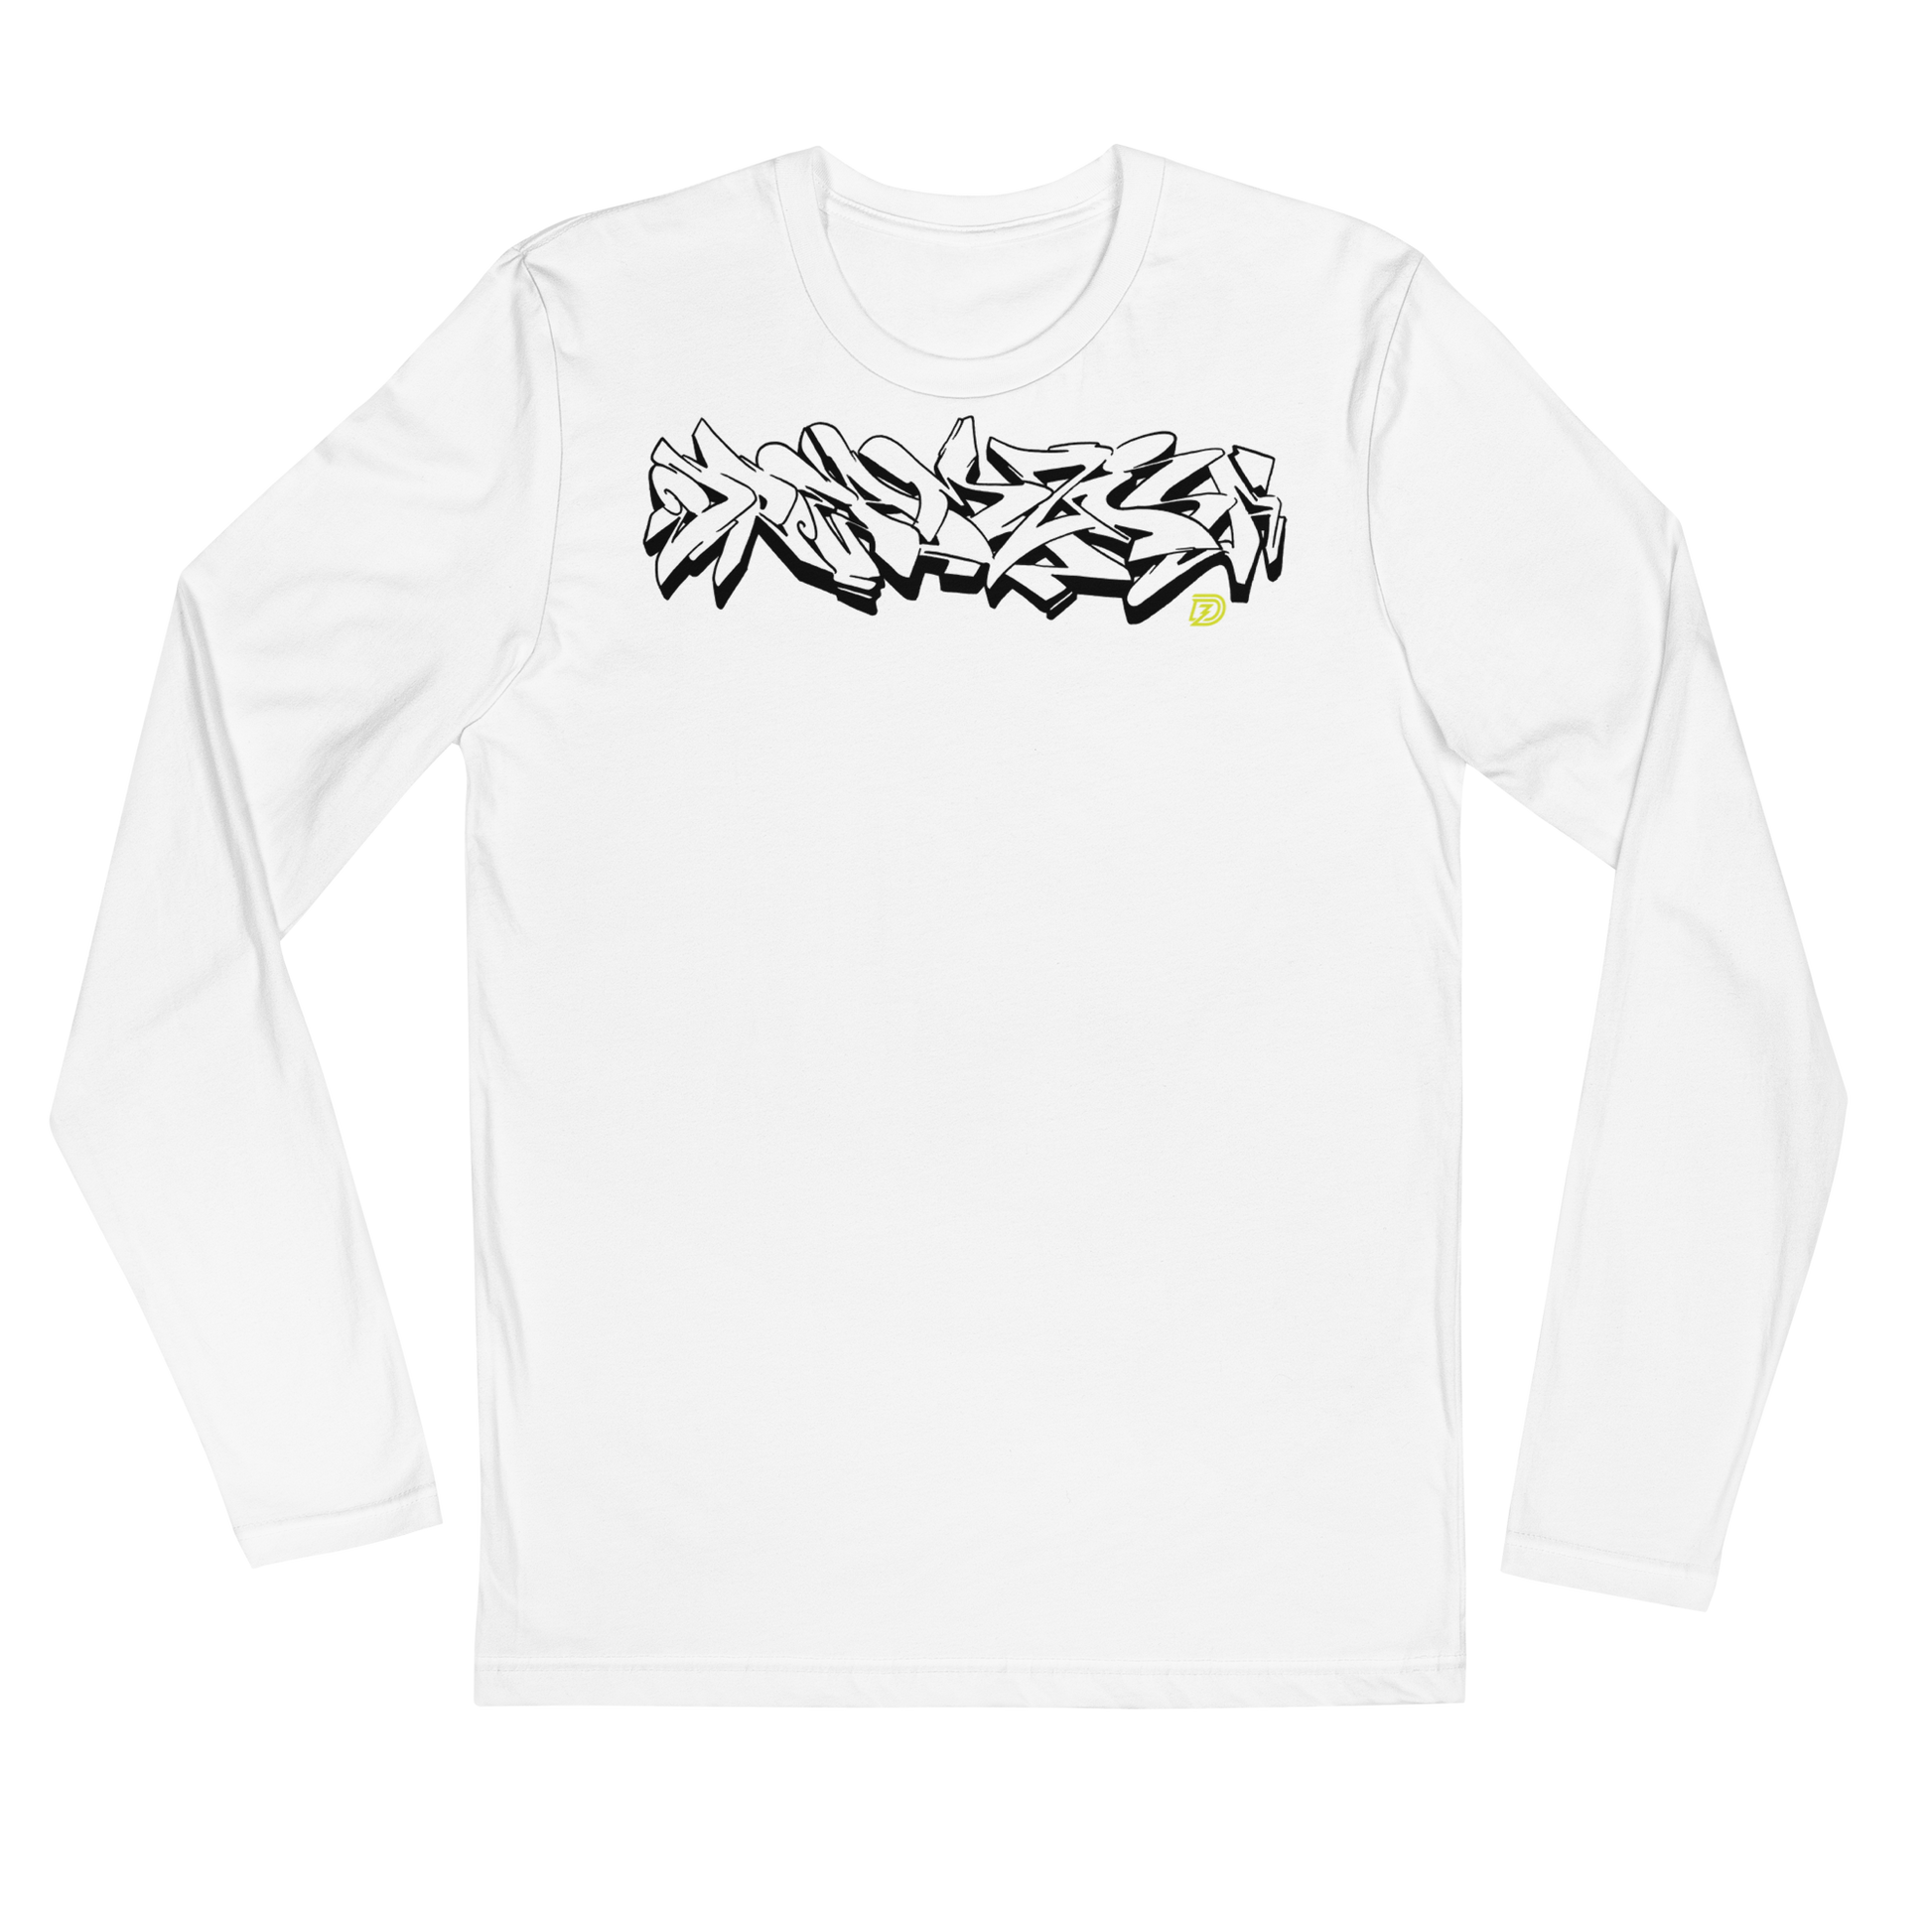 Graffiti Wildstyle 2 by Sanitor Long Sleeve Fitted Crew in White